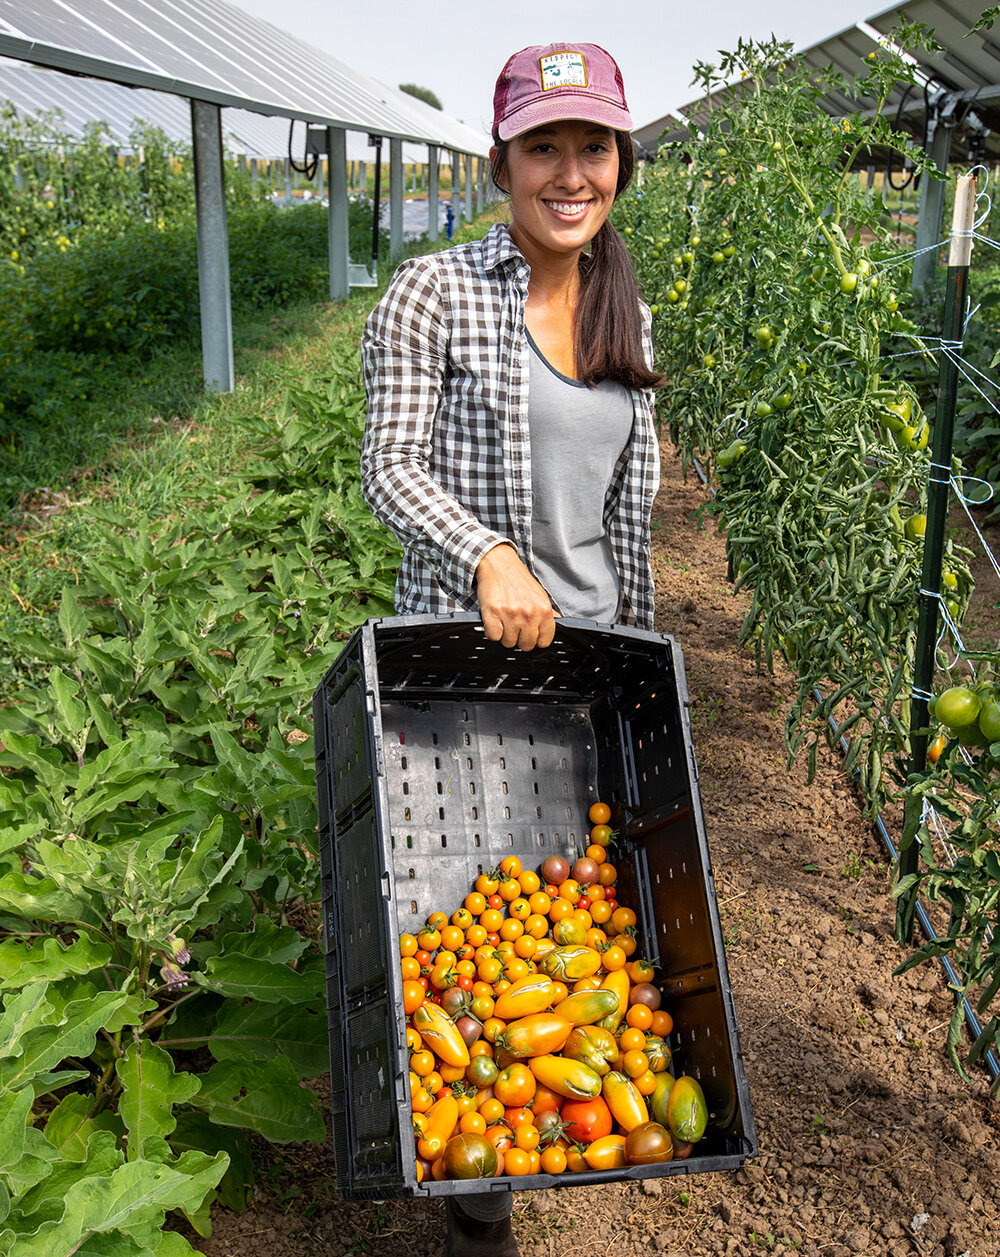 September 1, 2021 - Farmer Brittany Staie of Sprout City Farms, and farm manager at Jack's Solar Garden, picks tomatoes which have been growing at Jack’s Solar Garden in Longmont, Colo. Jack’s is a 1.2-MW, five-acre community solar farm and is the largest agrivoltaic research project in the U.S. The solar project was designed and built by Namasté Solar. (Photo by Werner Slocum / NREL)